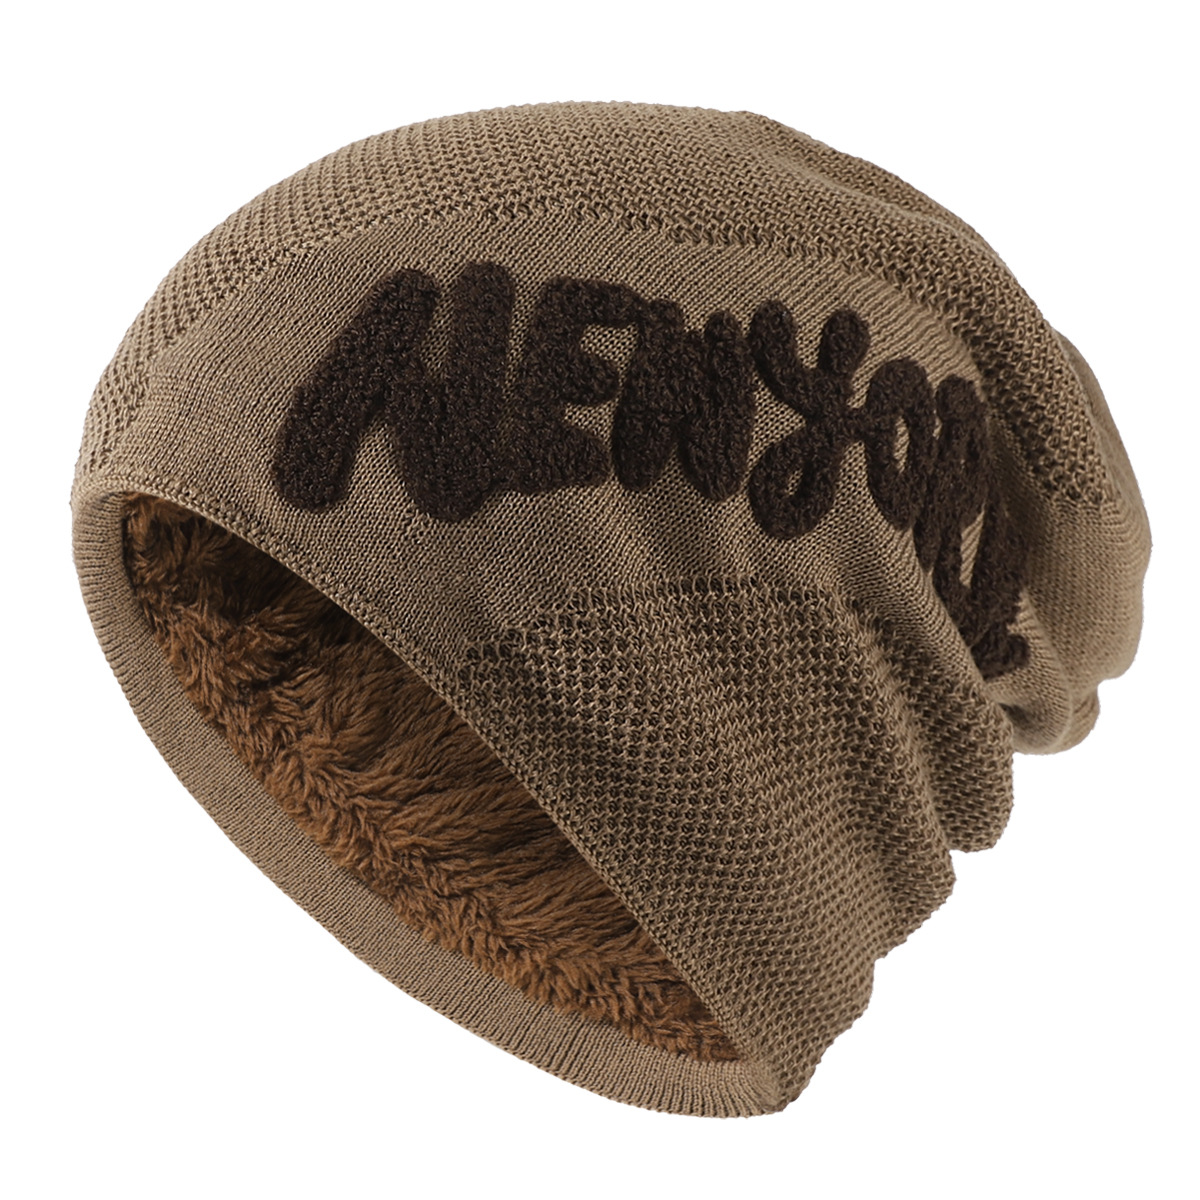 New York Embroidered Men's Chic Fleece Warm Knitted Hat